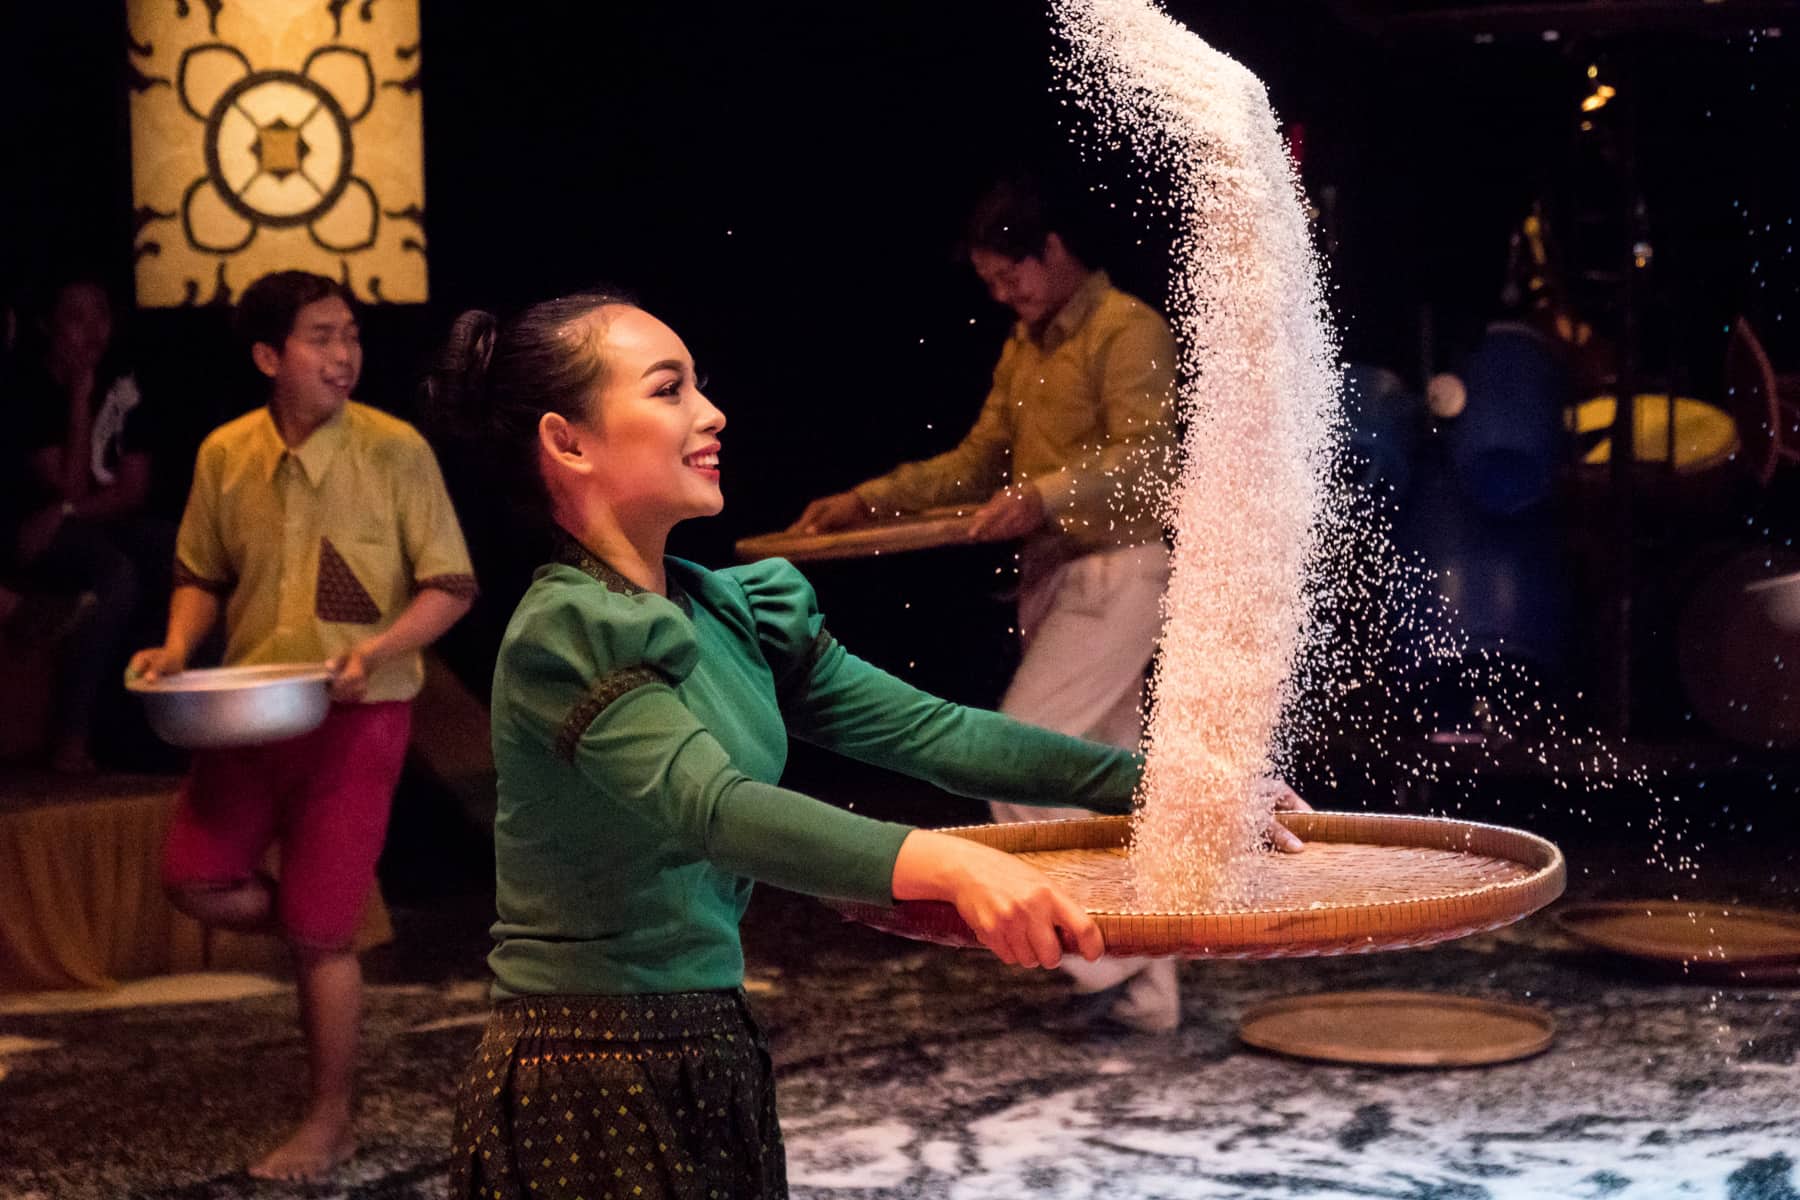 A Cambodian woman dressed in emerald green holds a wooden rice plate and decoratively throws a long line of rice into the air during a circus performance. Behind her are two men in yellow shirts holding bowls, and there is rice strewn all over the floor.